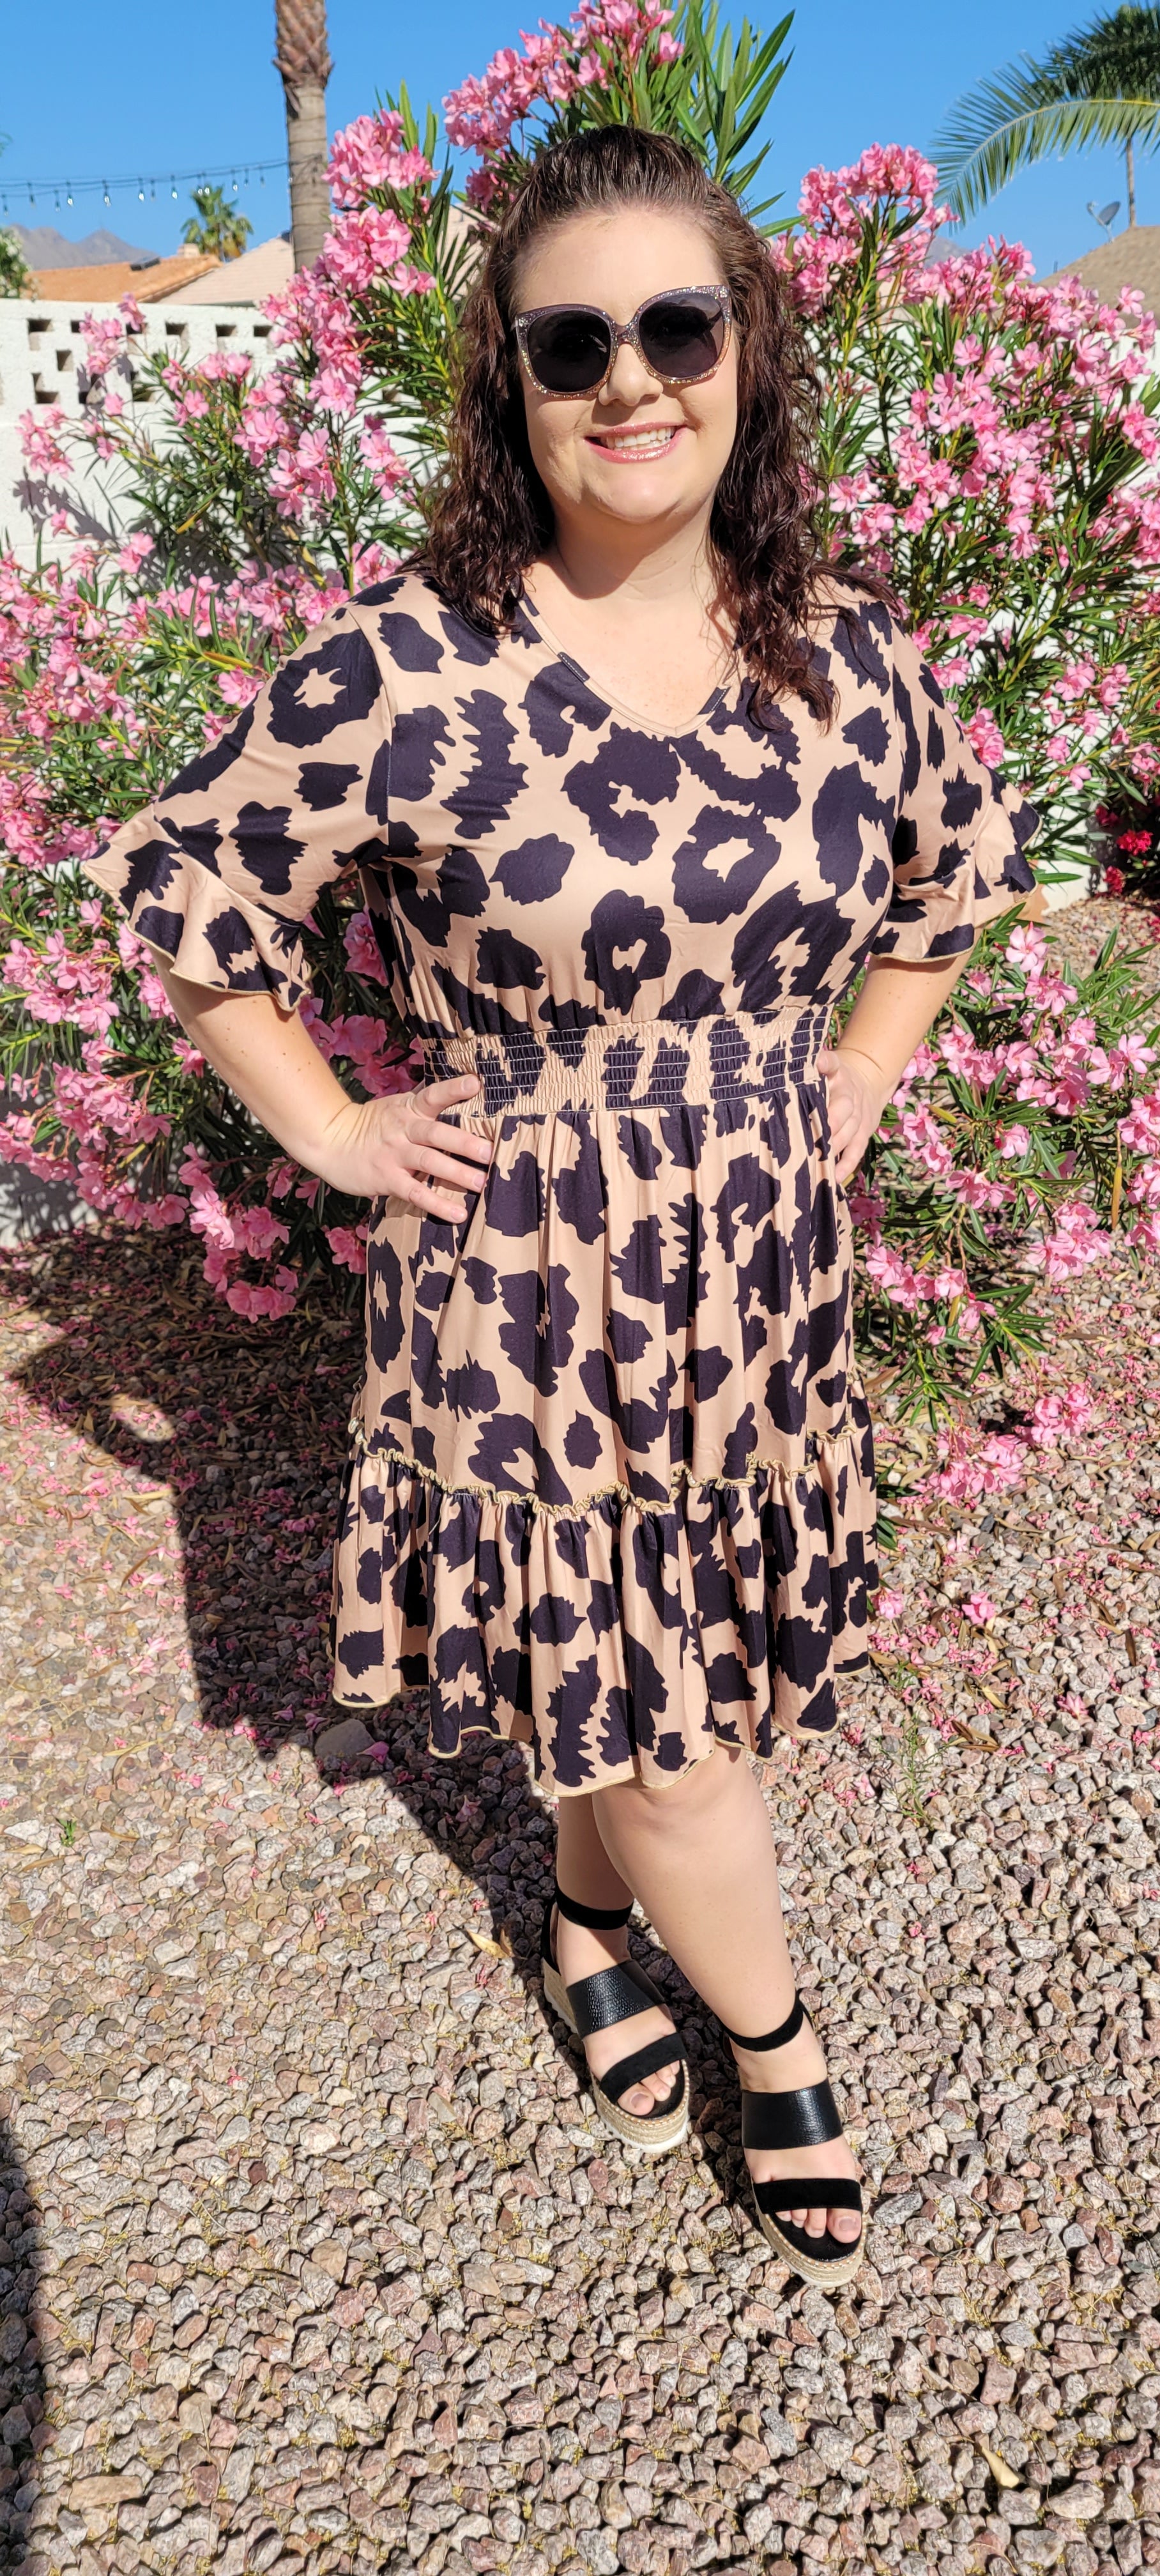 “The Wild Side” is a camel and black colored dress. This dress features a buttery soft animal print, v-neck, elastic cinched waistband, short bell sleeves with ruffles, and ruffle hemline. It sits above the knee. This dress is just as cozy as pajamas! Sizes small through large